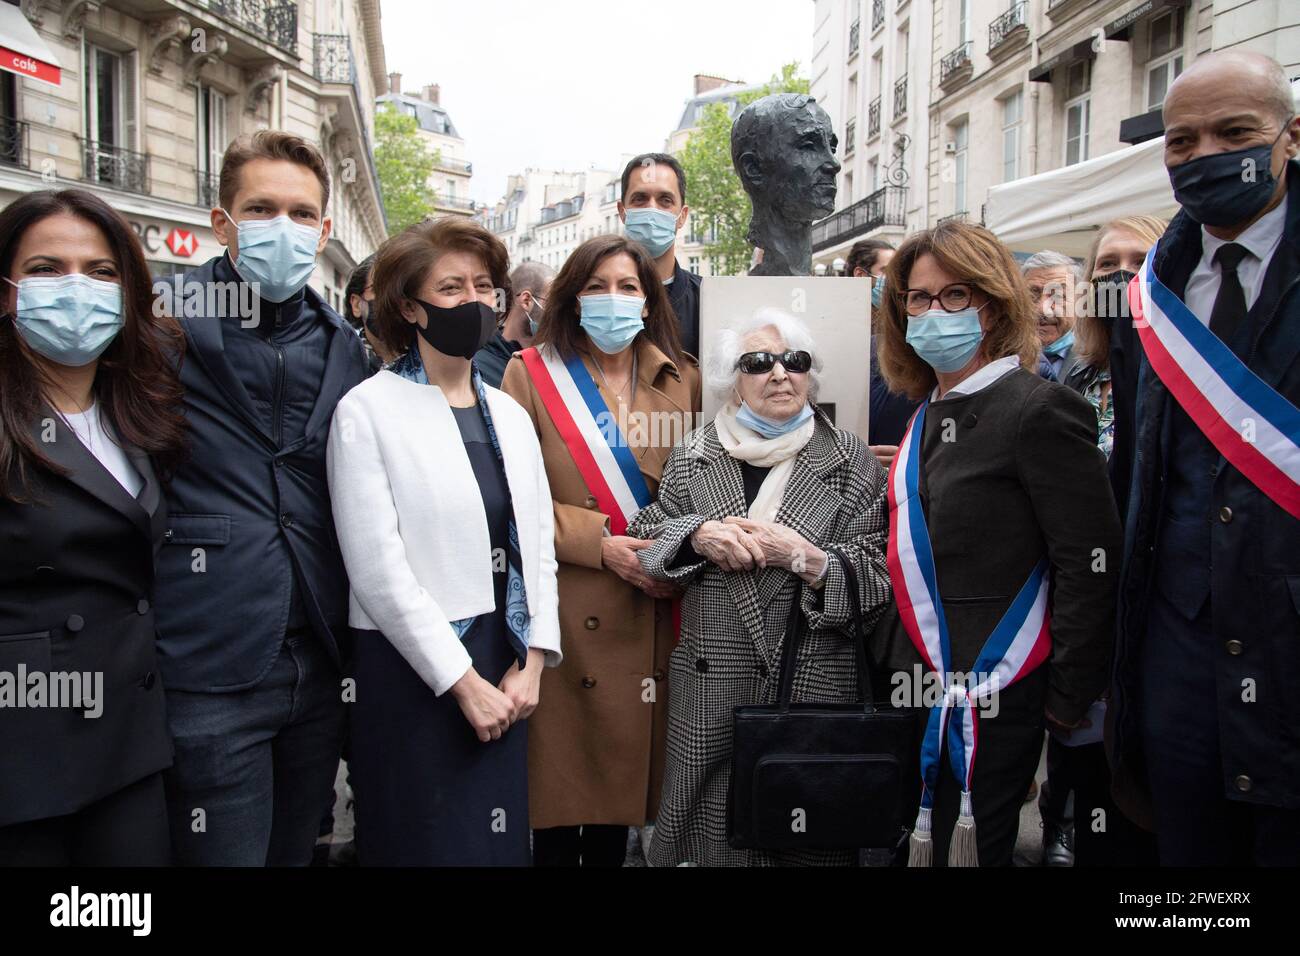 Kristina Sarkisyan, Nicolas Aznavour (son of Charles Aznavour), artist Alice Melikian, Mayor of Paris Anne Hidalgo, singer Grand Corps Malade (Fabien Marsaud), Aida Aznavourian (sister of Charles Aznavour) and Arnaud Ngatcha attending the unveilling of a statue representing Charles Aznavour in Paris, France, on May 22, 2021. Photo by Aurore Marechal/ABACAPRESS.COM Stock Photo